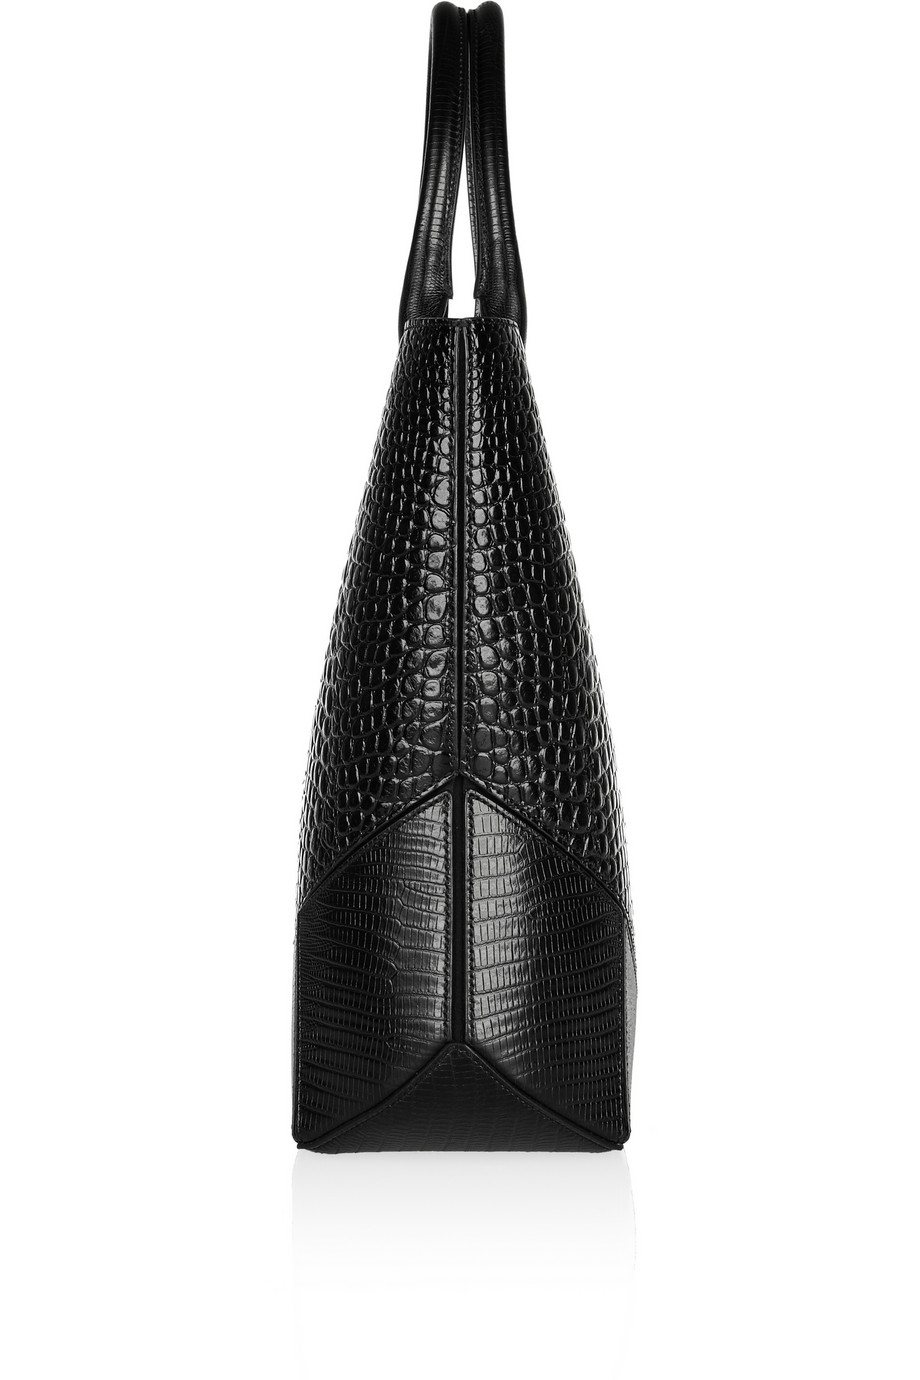 Givenchy Easy Bag in Black Croc Embossed Leather - Lyst